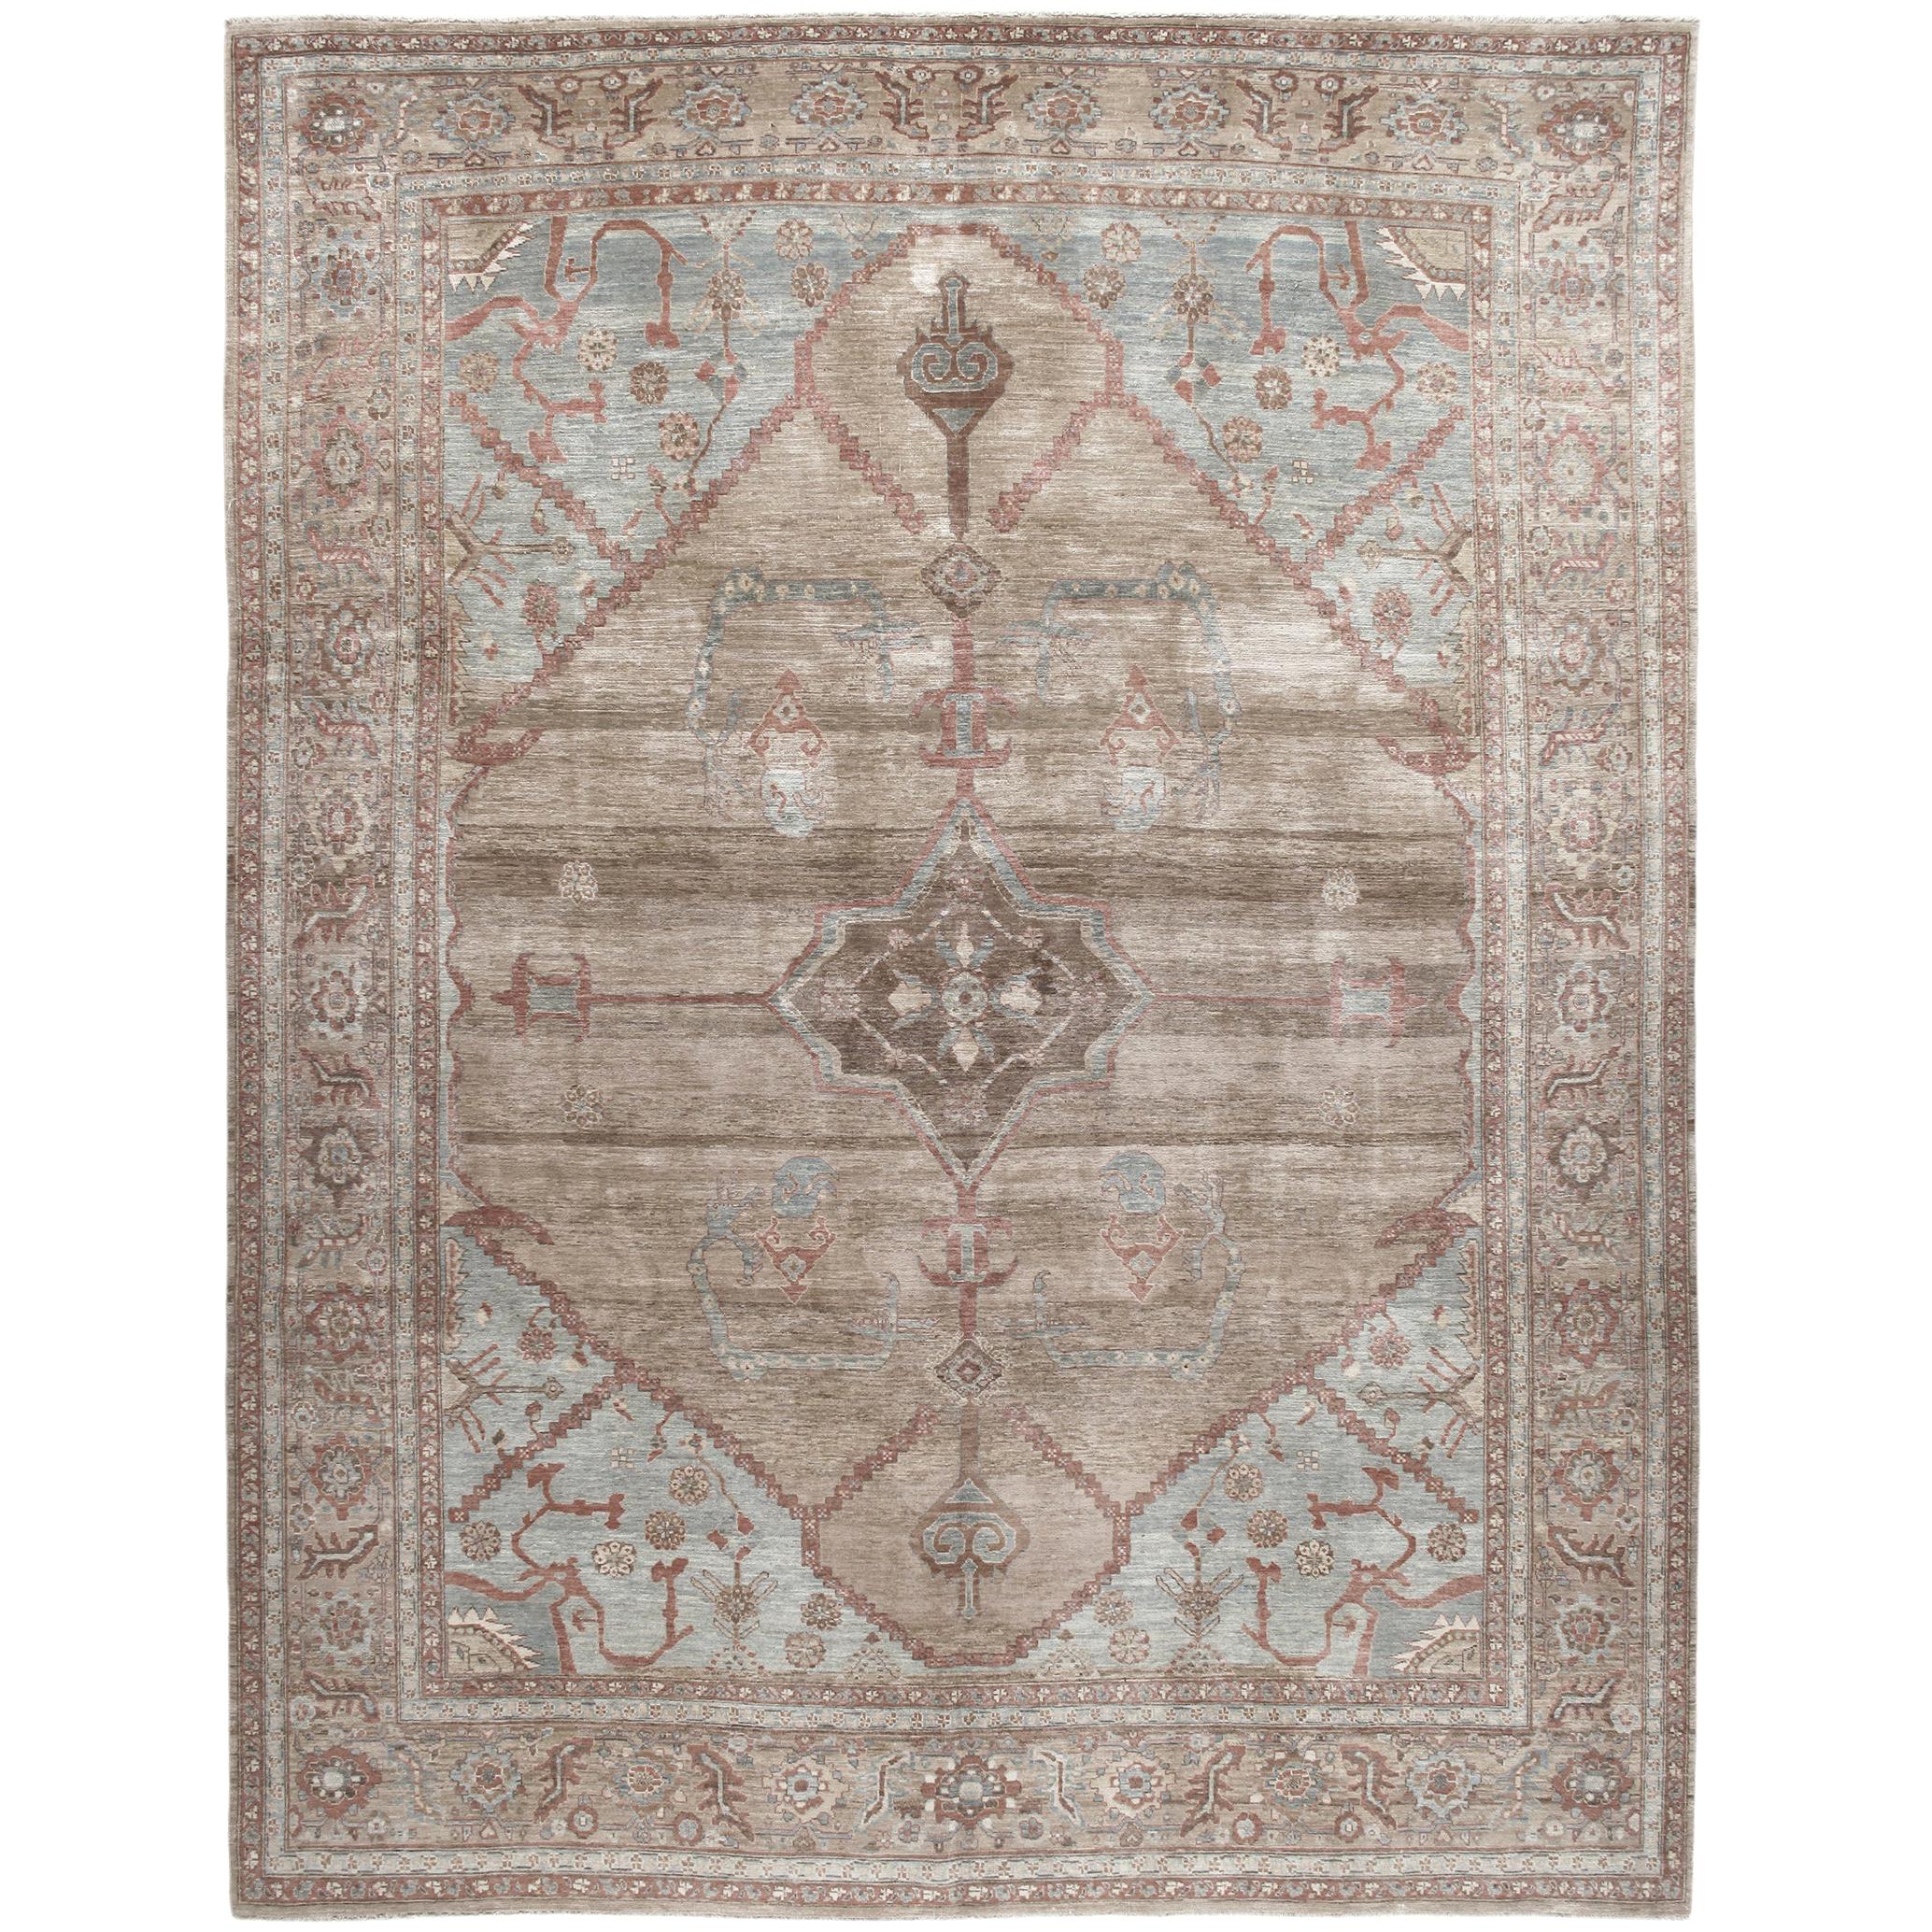 Persian Traditional Bakshaish Handknotted Rug in Camel and Pale Blue Color For Sale